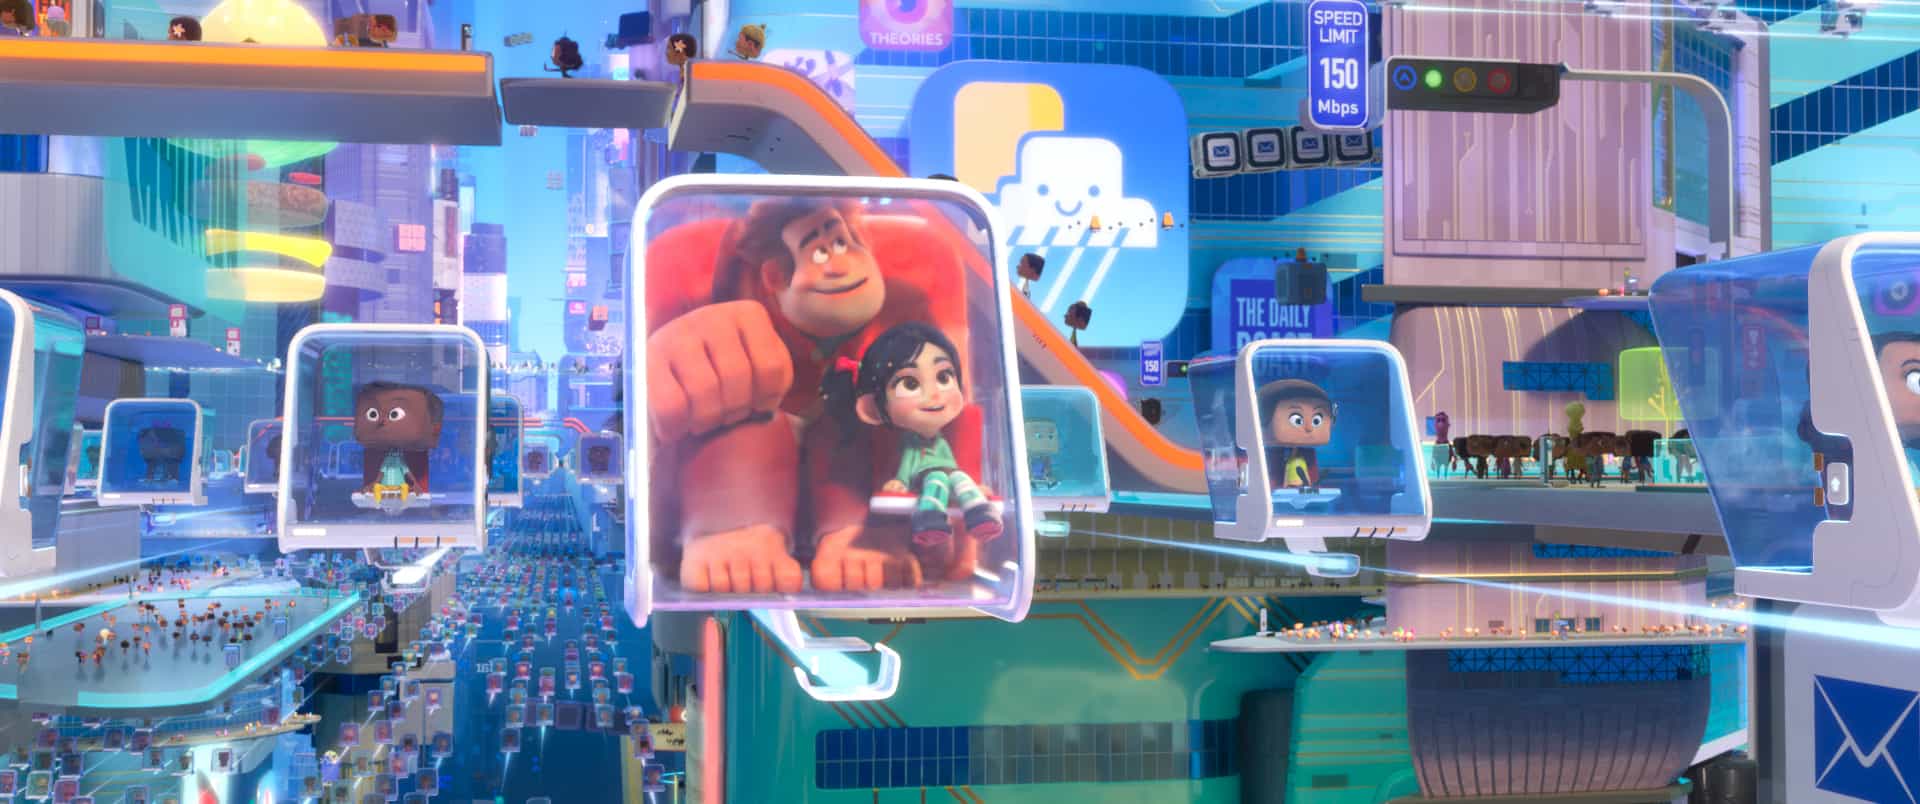 parent review for Ralph Breaks the Internet